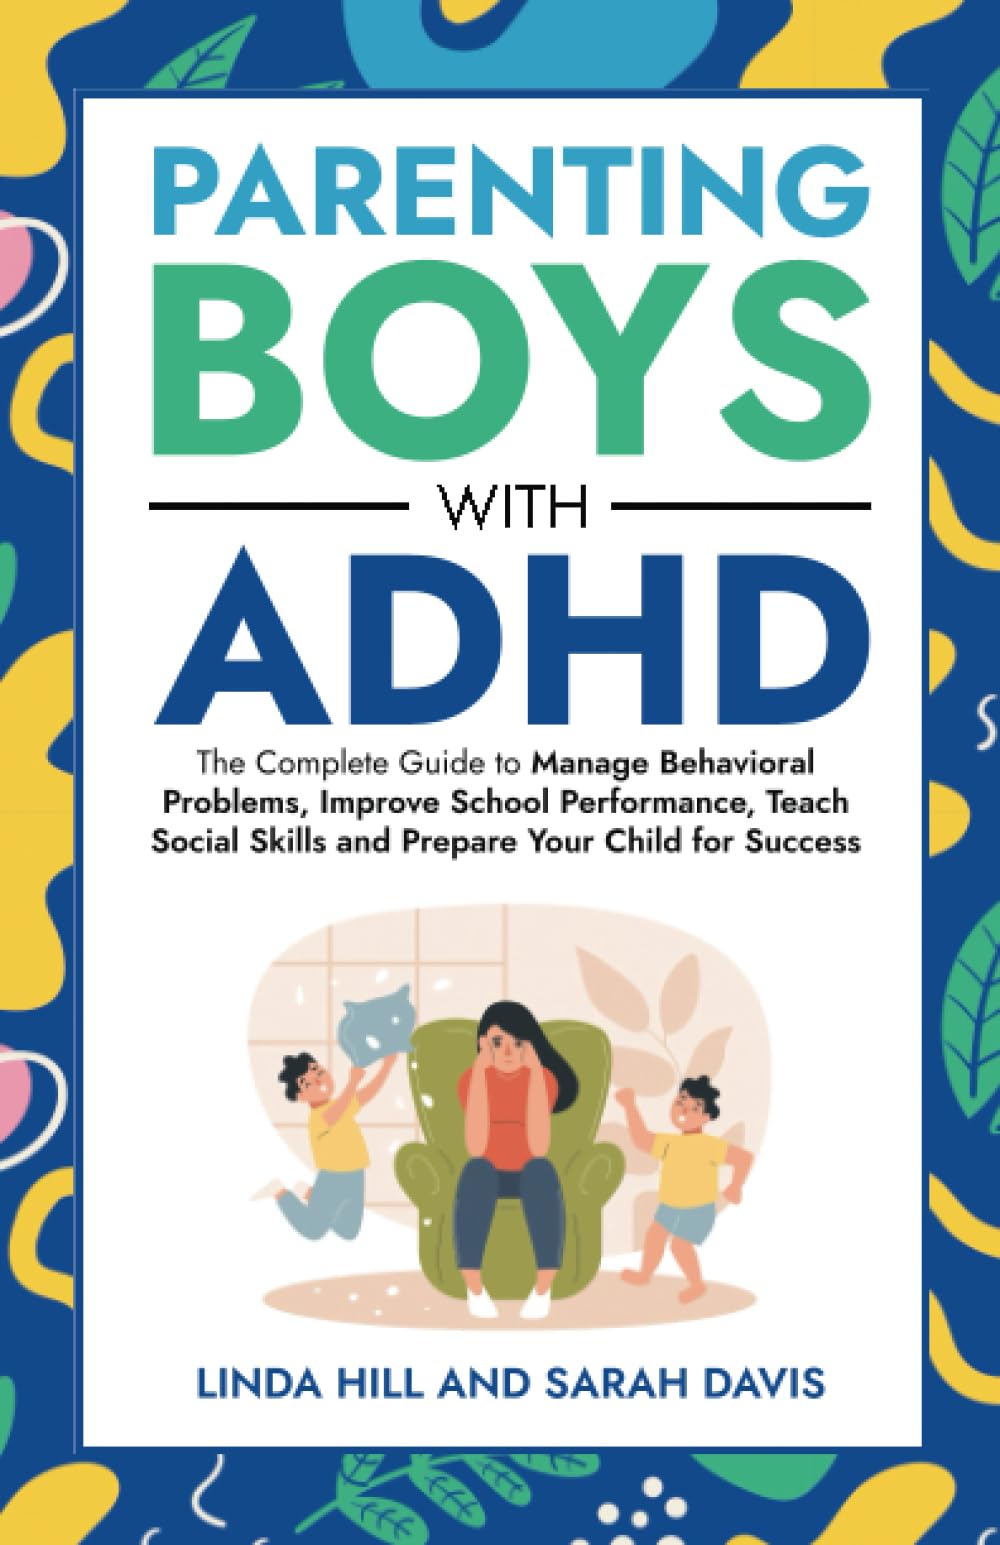 Parenting Boys with ADHD: The Complete Guide to Manage Behavioral Problems, Improve School Performance, Teach Social Skills and Prepare Your Child for Success (Women with ADHD)